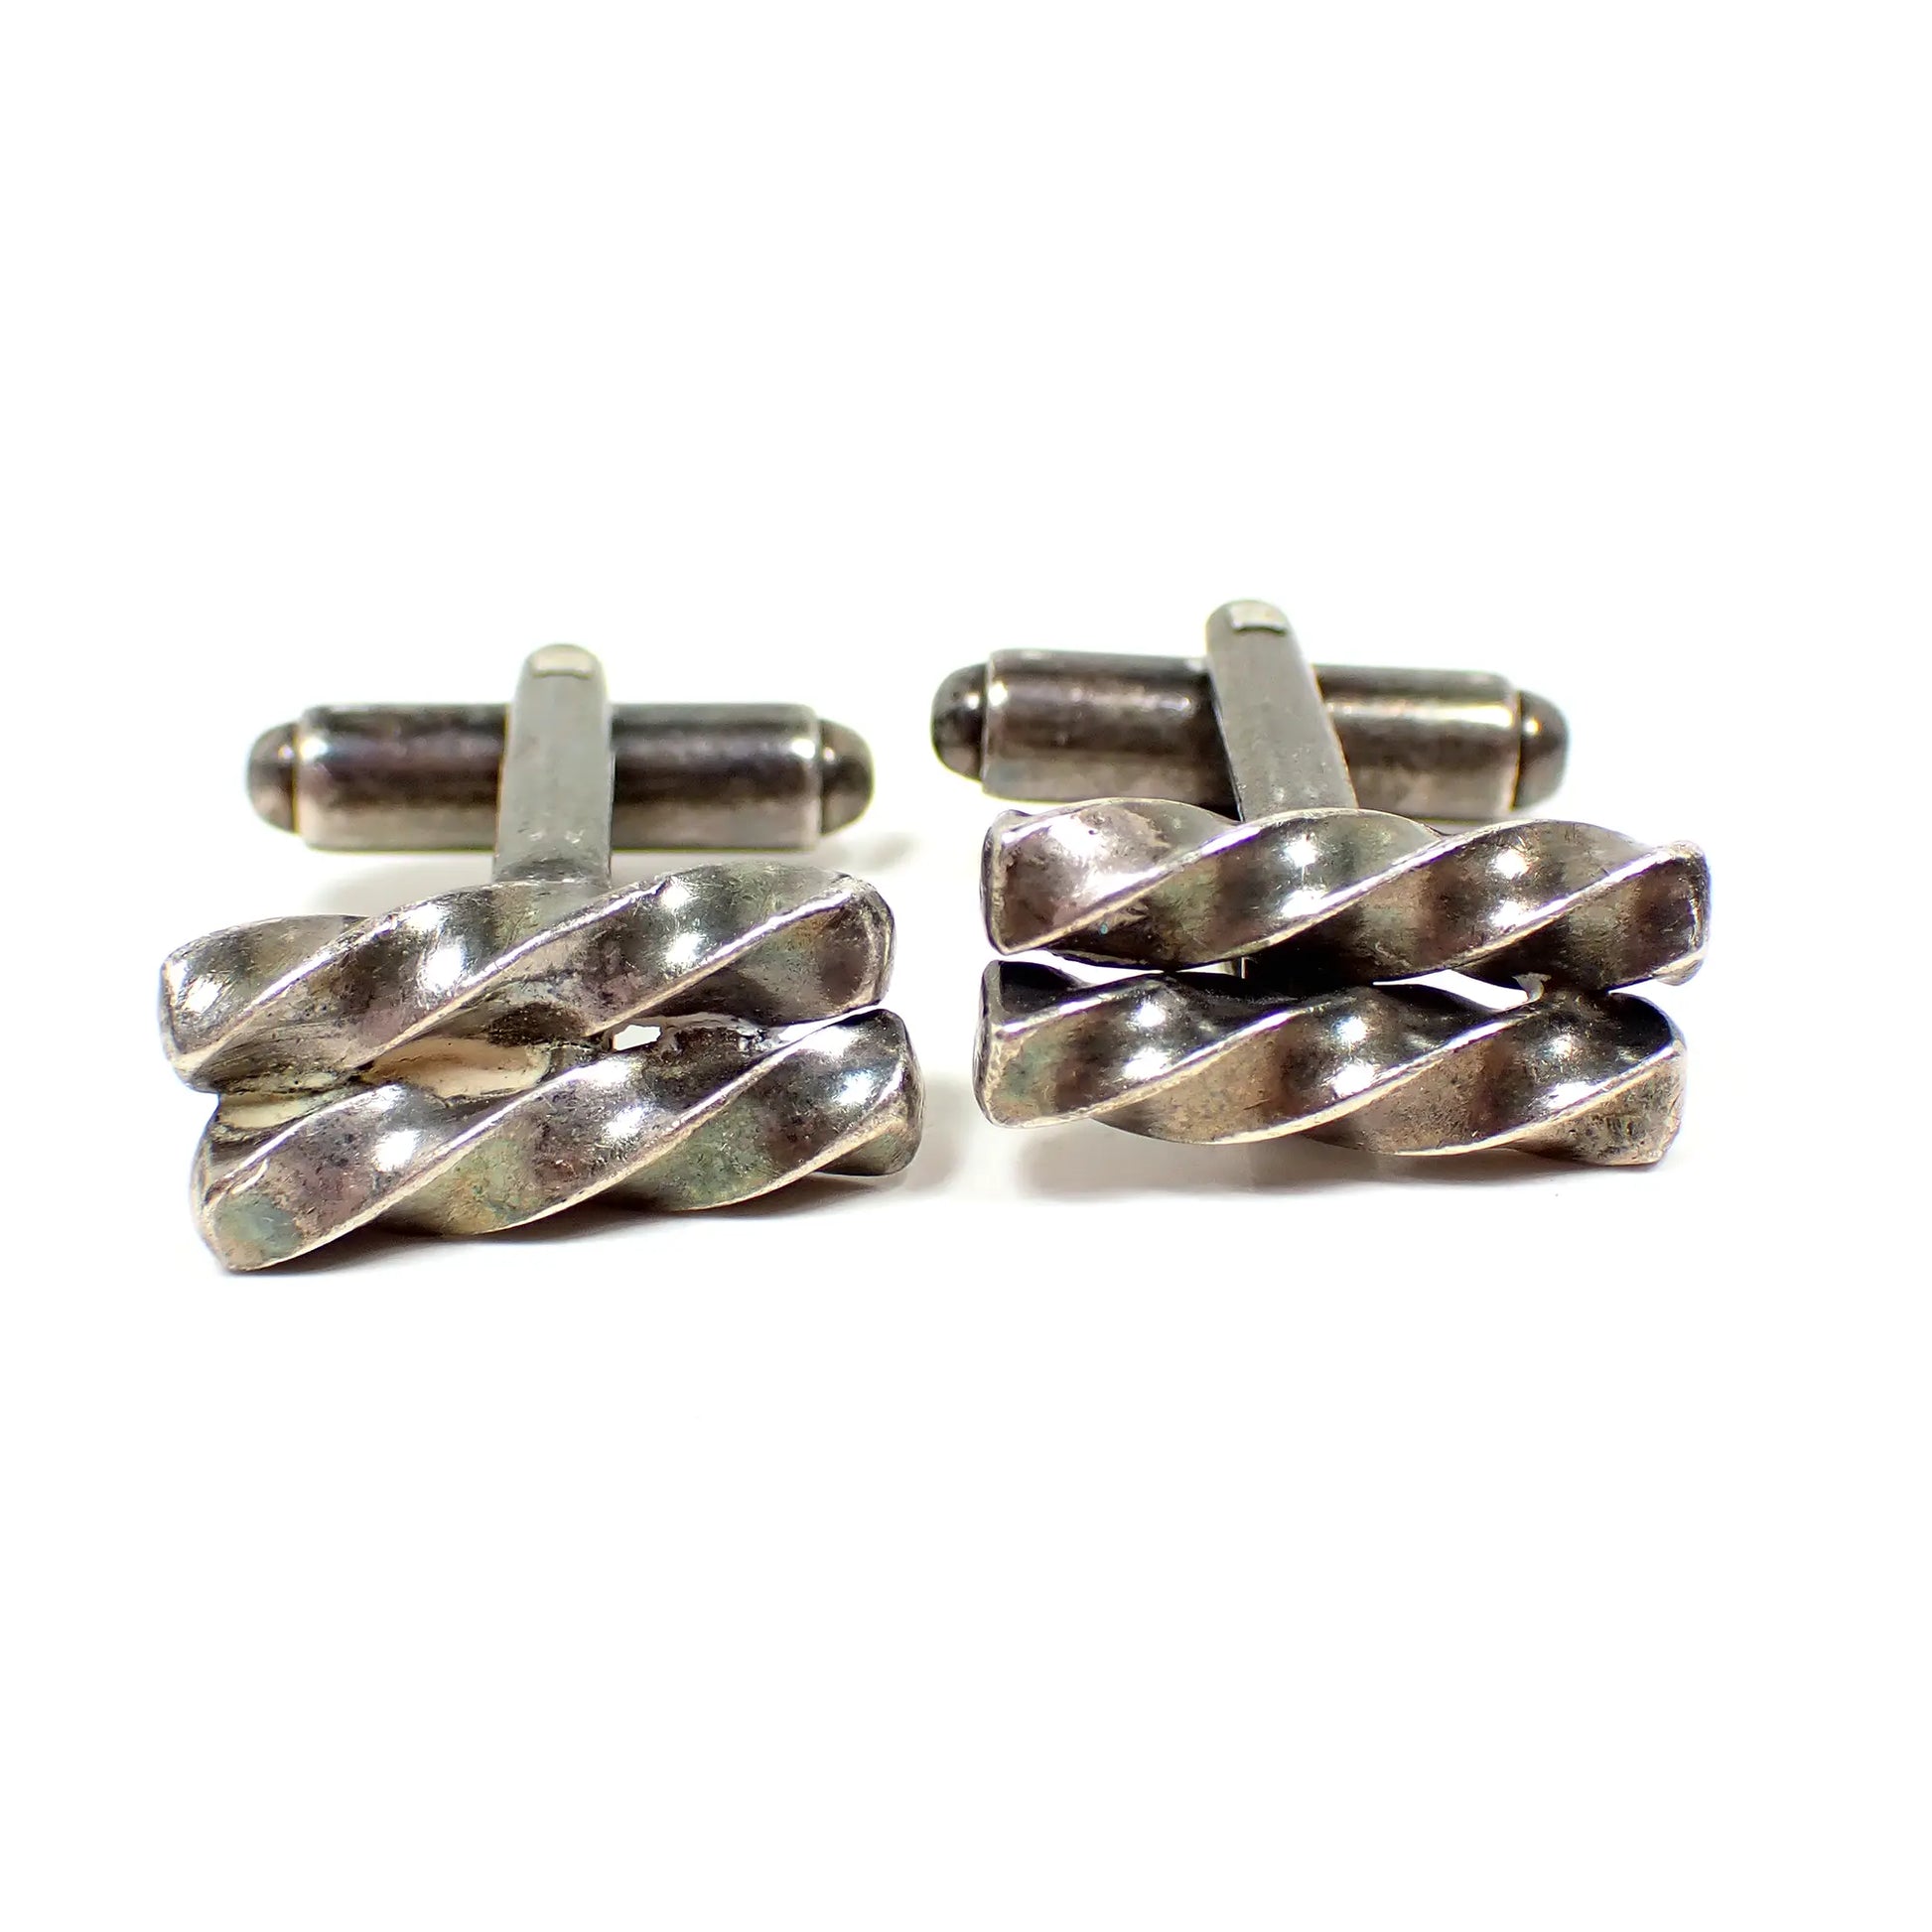 Front view of the retro vintage sterling silver cufflinks. The sterling has darkened to a gray and silver color from age. The fronts have two short twisted bars next to each other.